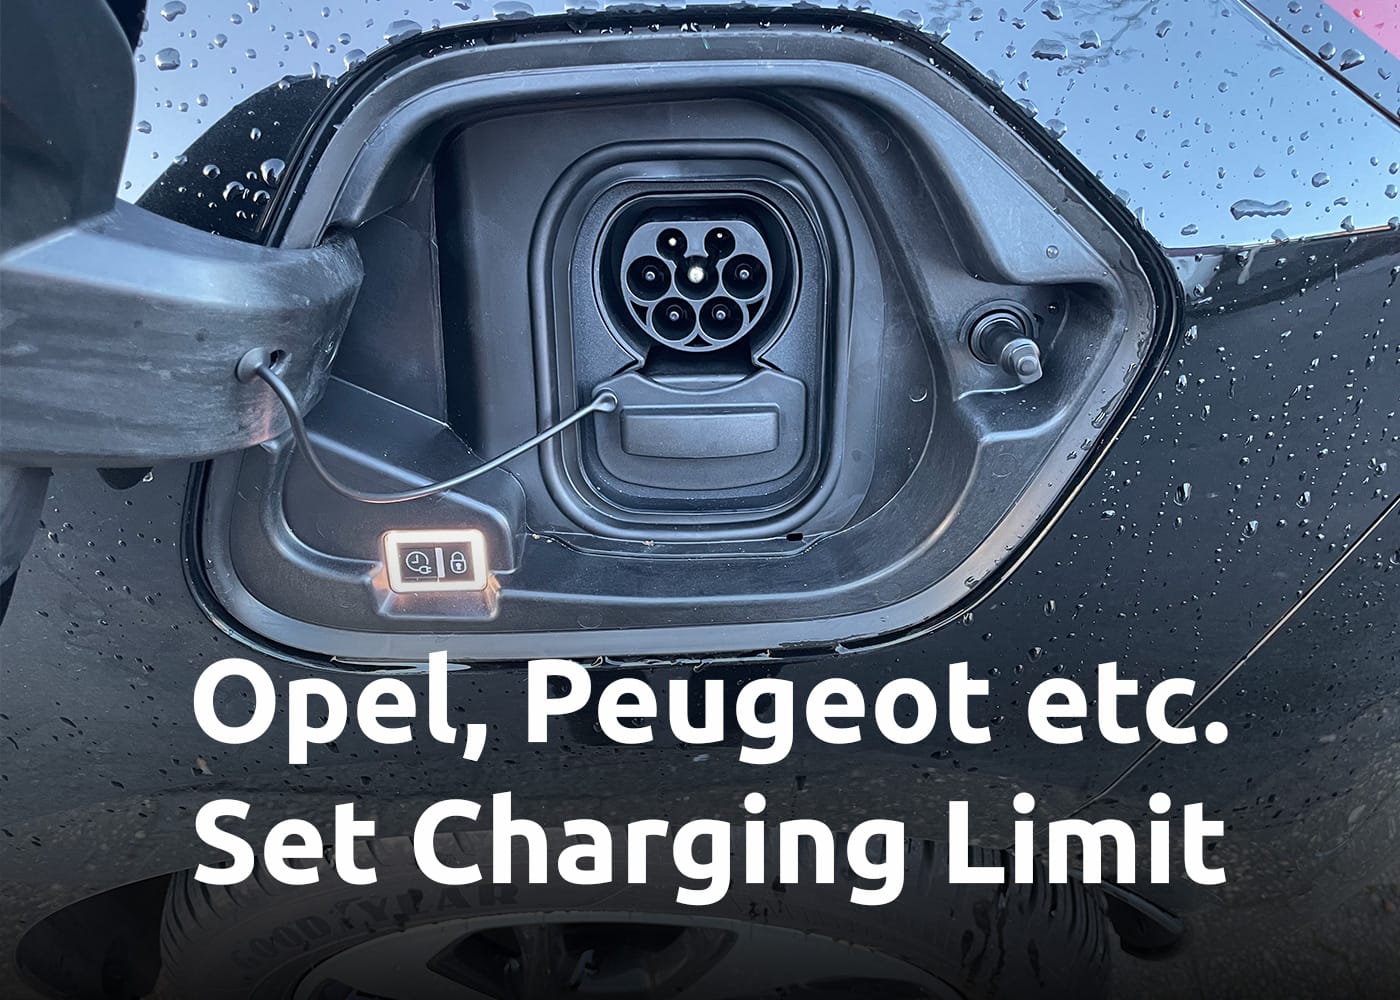 Opel / Peugeot Electric Vehicle: Set Charging Threshold Limit (to 80%)